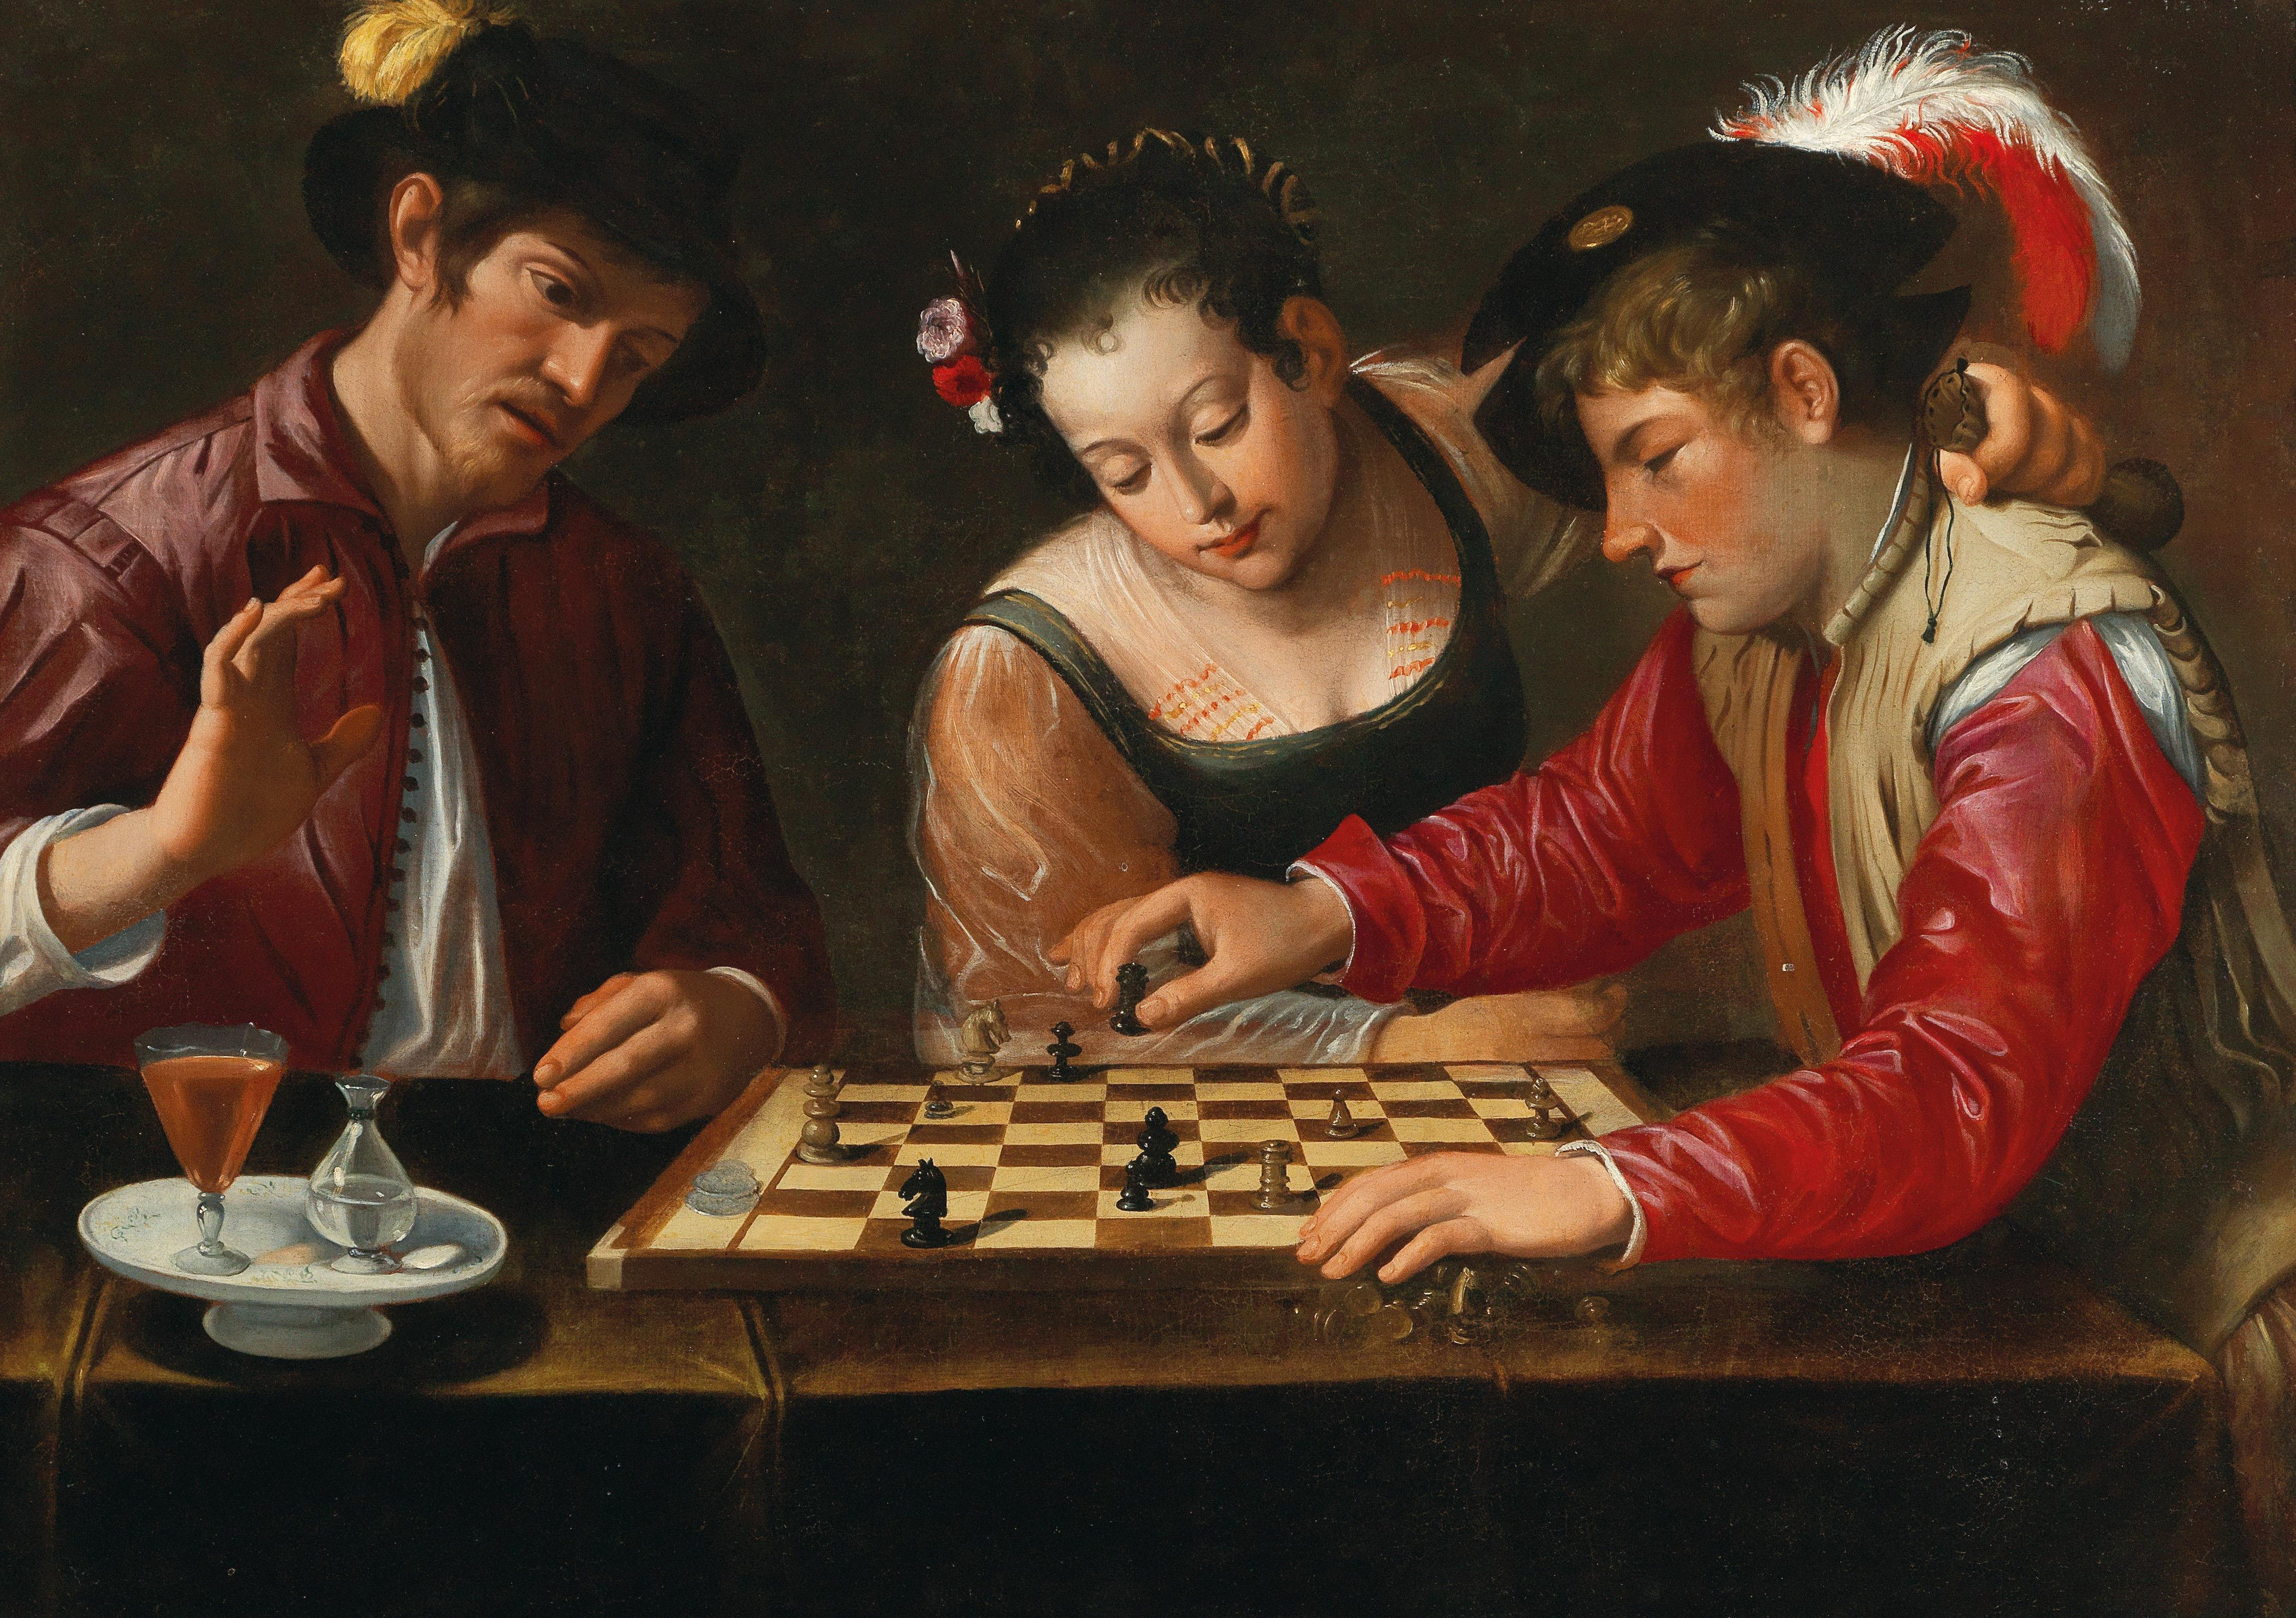 "Chess players" by Caravaggio